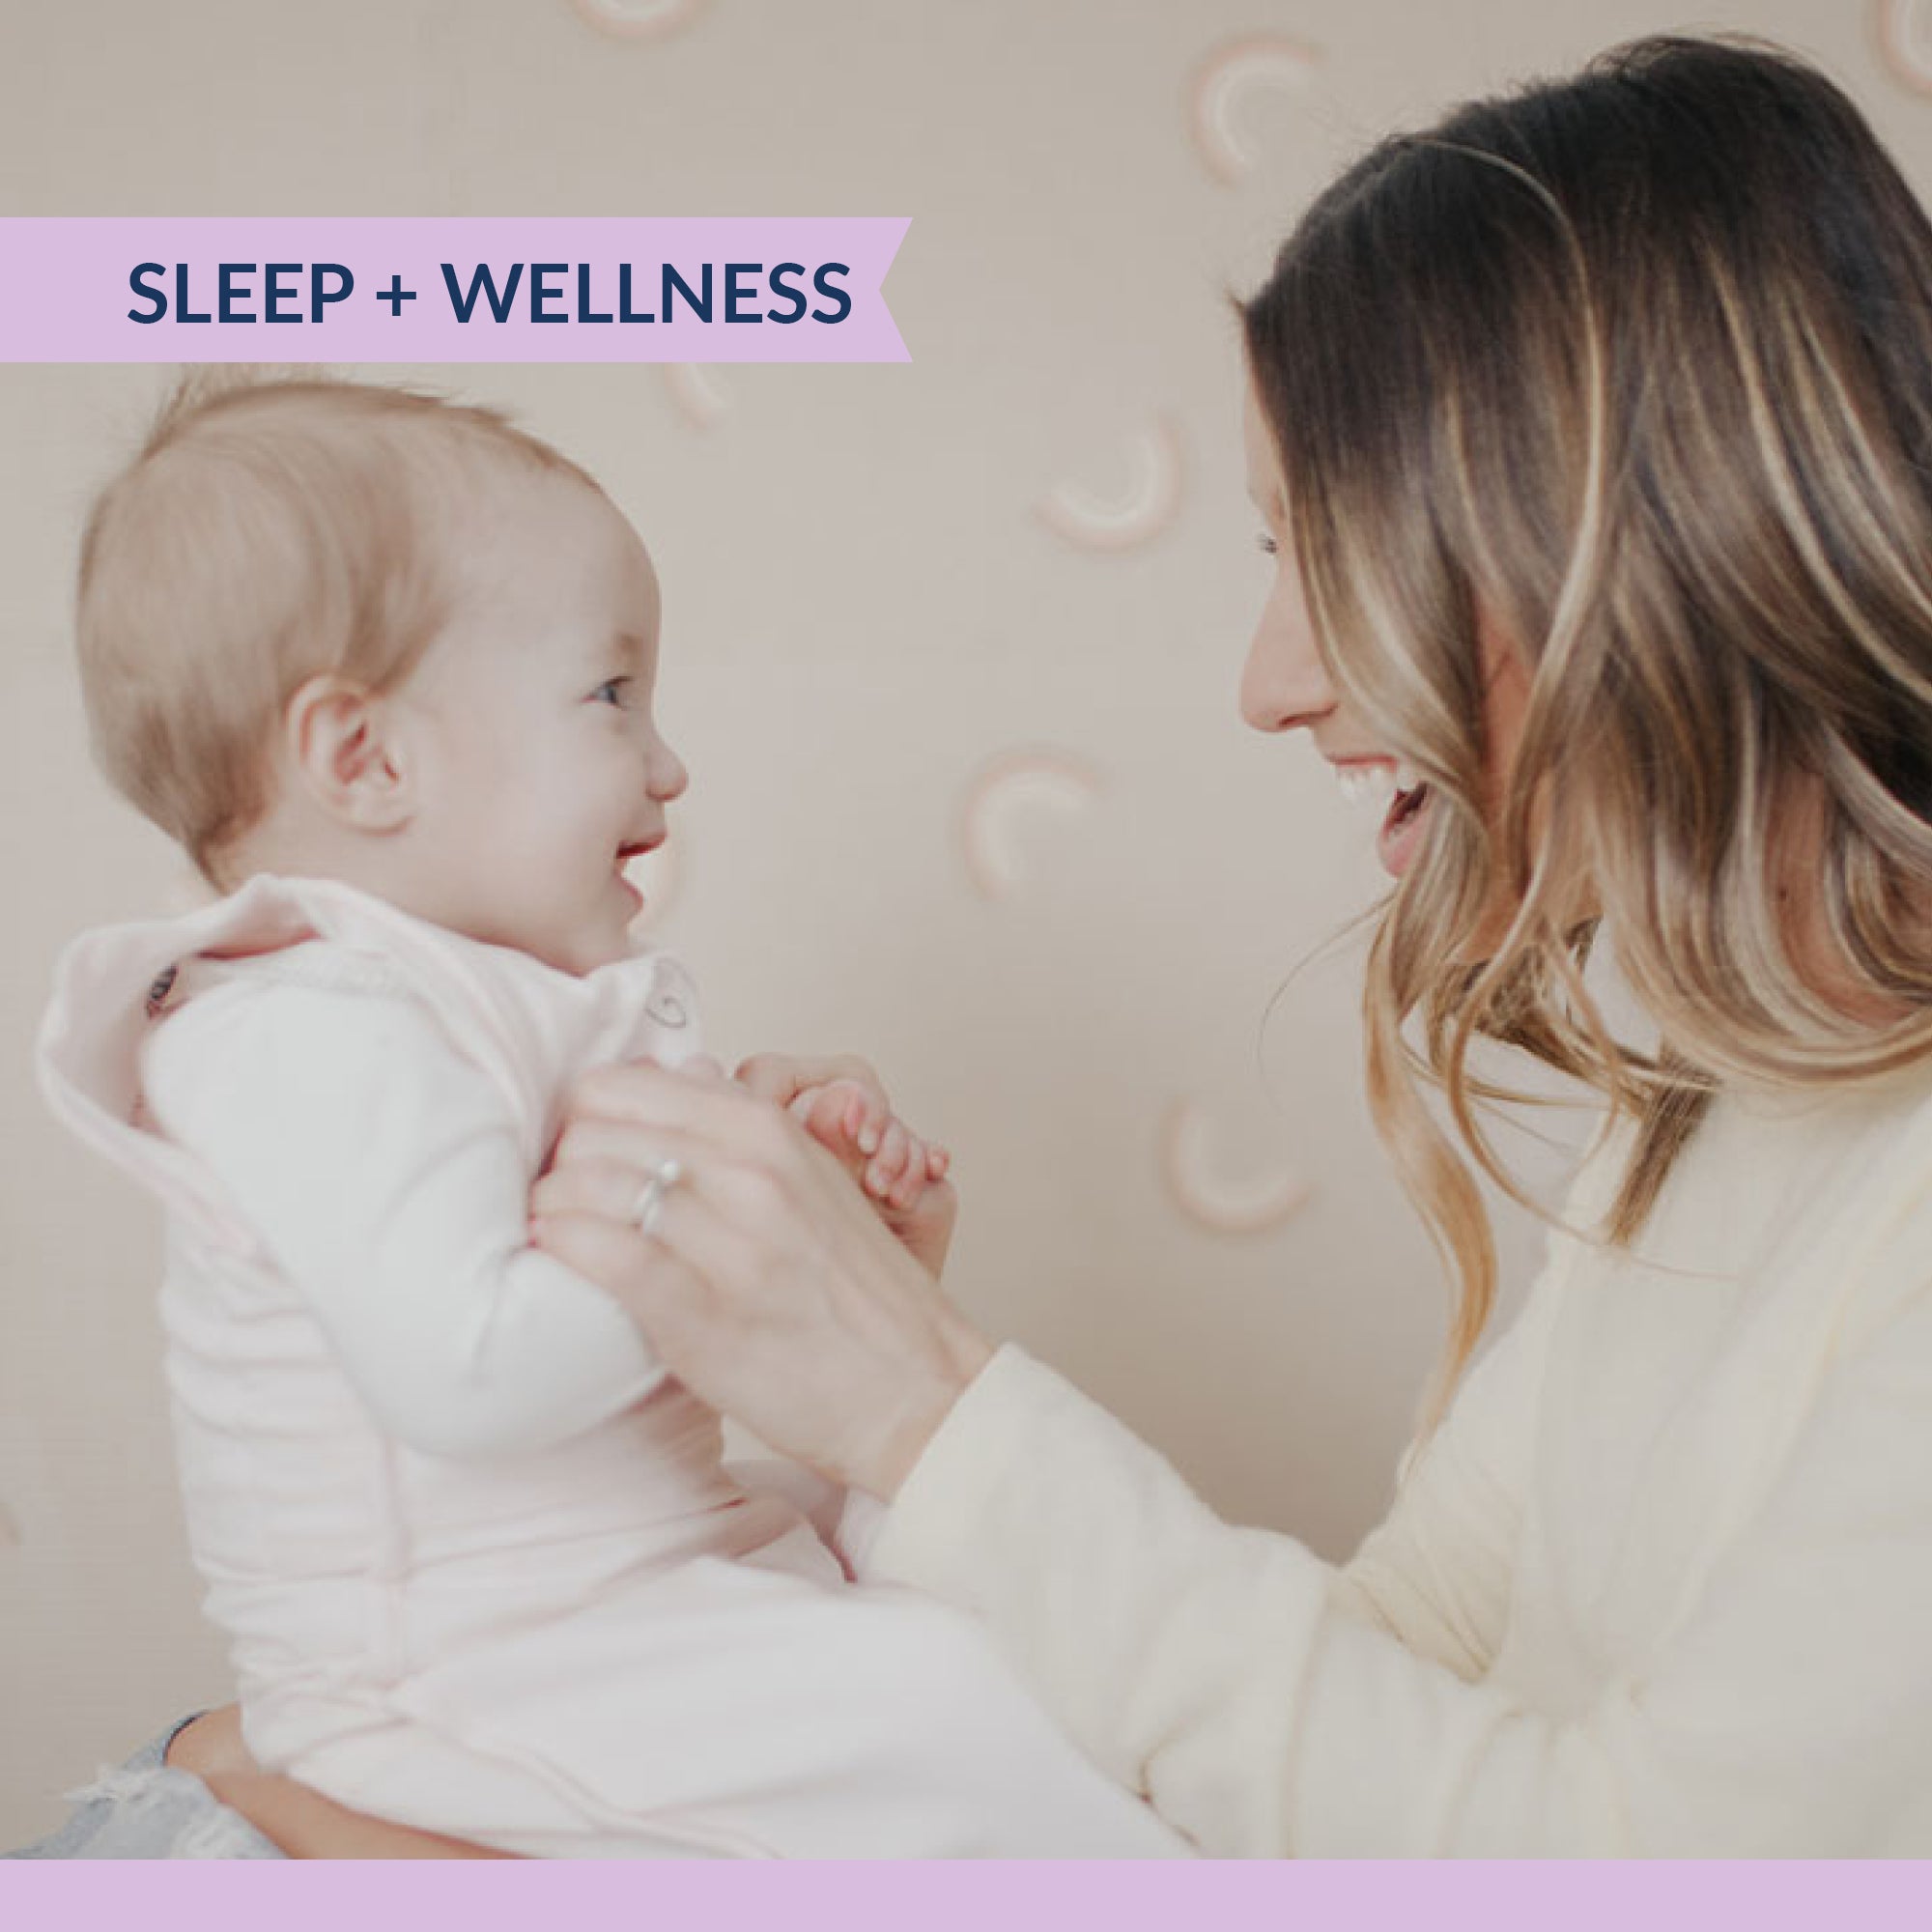 Newborn Won't Sleep Unless Held: What Can I Do to Help My Baby Fall Asleep Without Me?